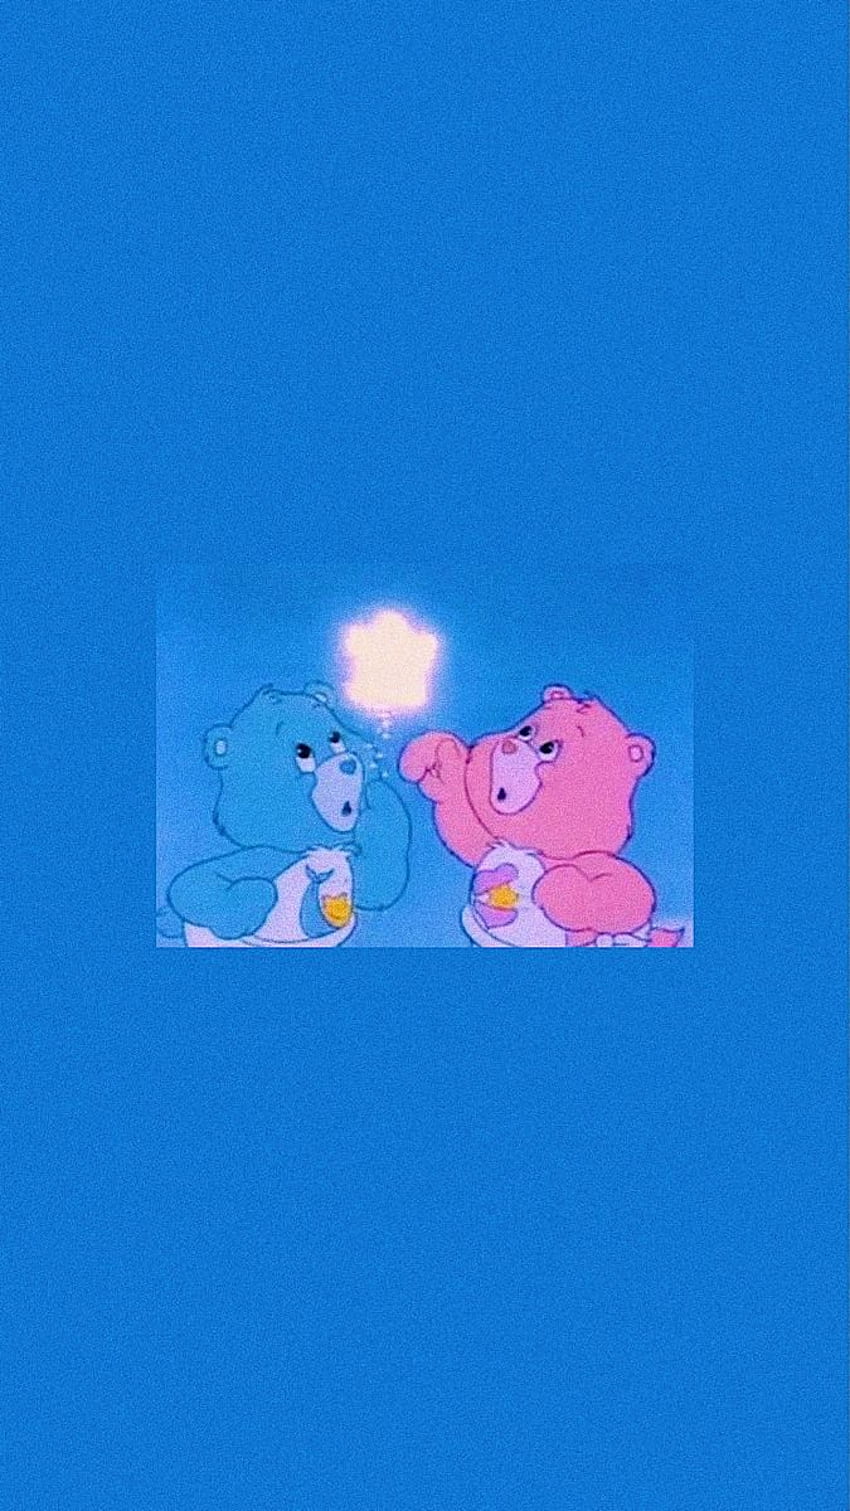 , the image features two lovable Care Bears in close proximity. One Care Bear appears to be a bit larger than the other, and they are both located near each other on a blue background. Both bears are oriented in an open-handed gesture, potentially sharing a moment of affection or bonding together. - Care Bears